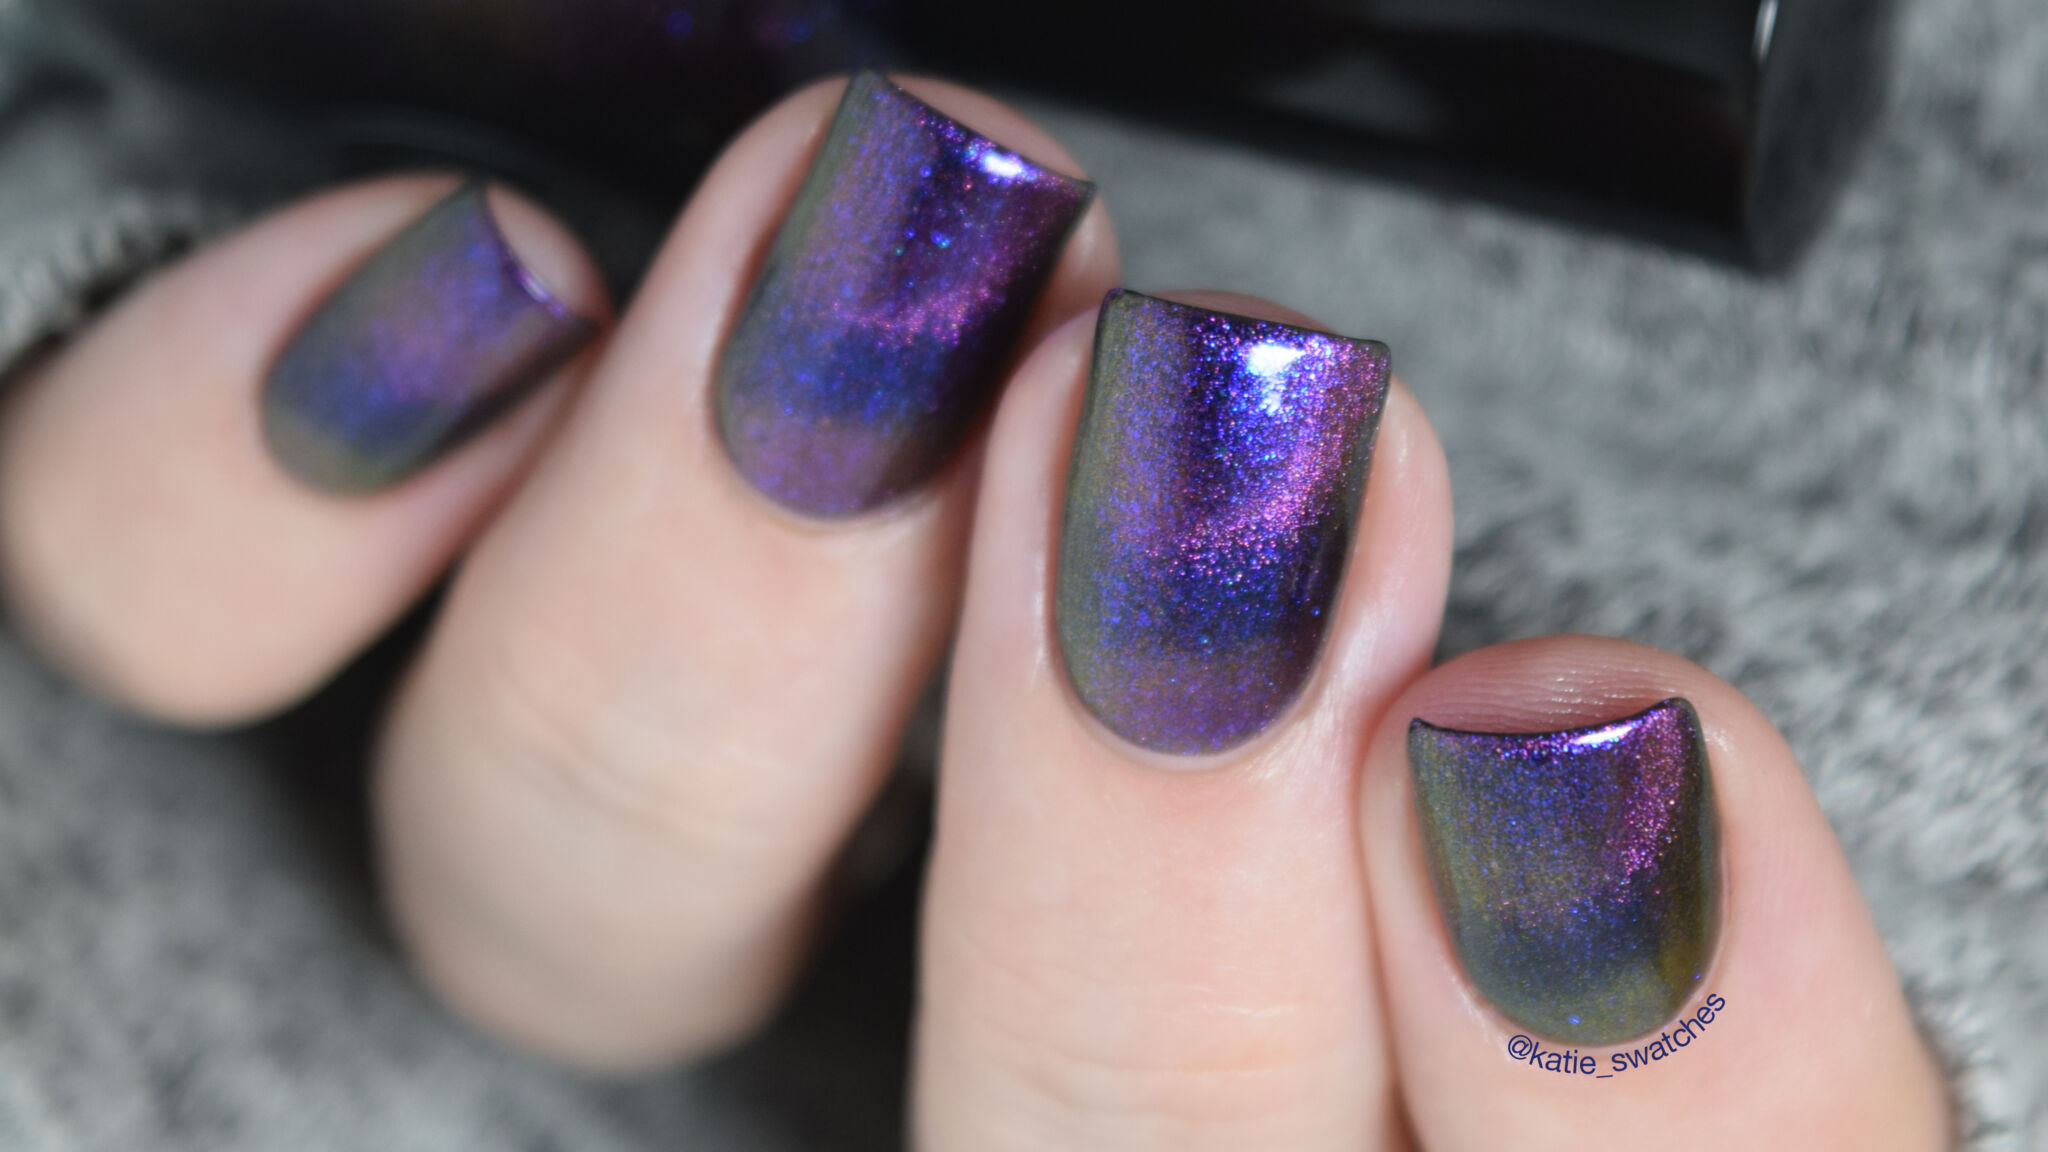 Polished for Days - Started With A Mouse magnetic nail polish - Polish Pickup February 2019 Duos & Pairs